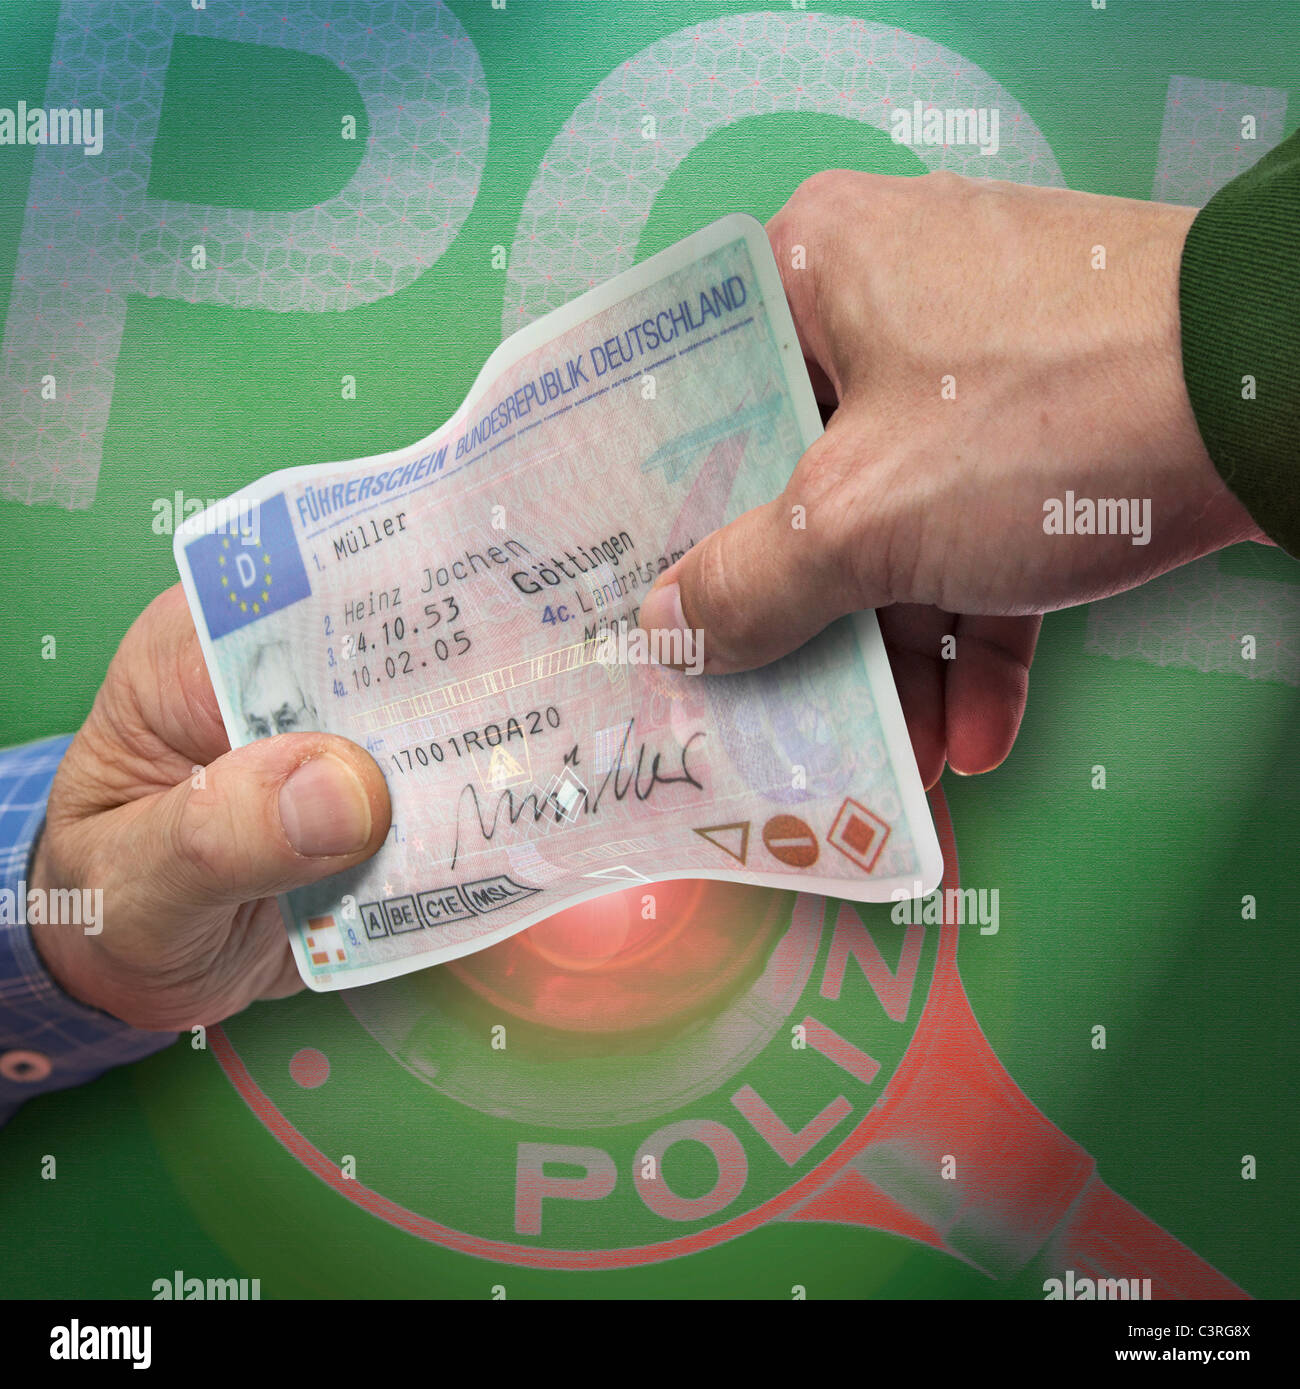 Human hands holding driving license, close up Stock Photo